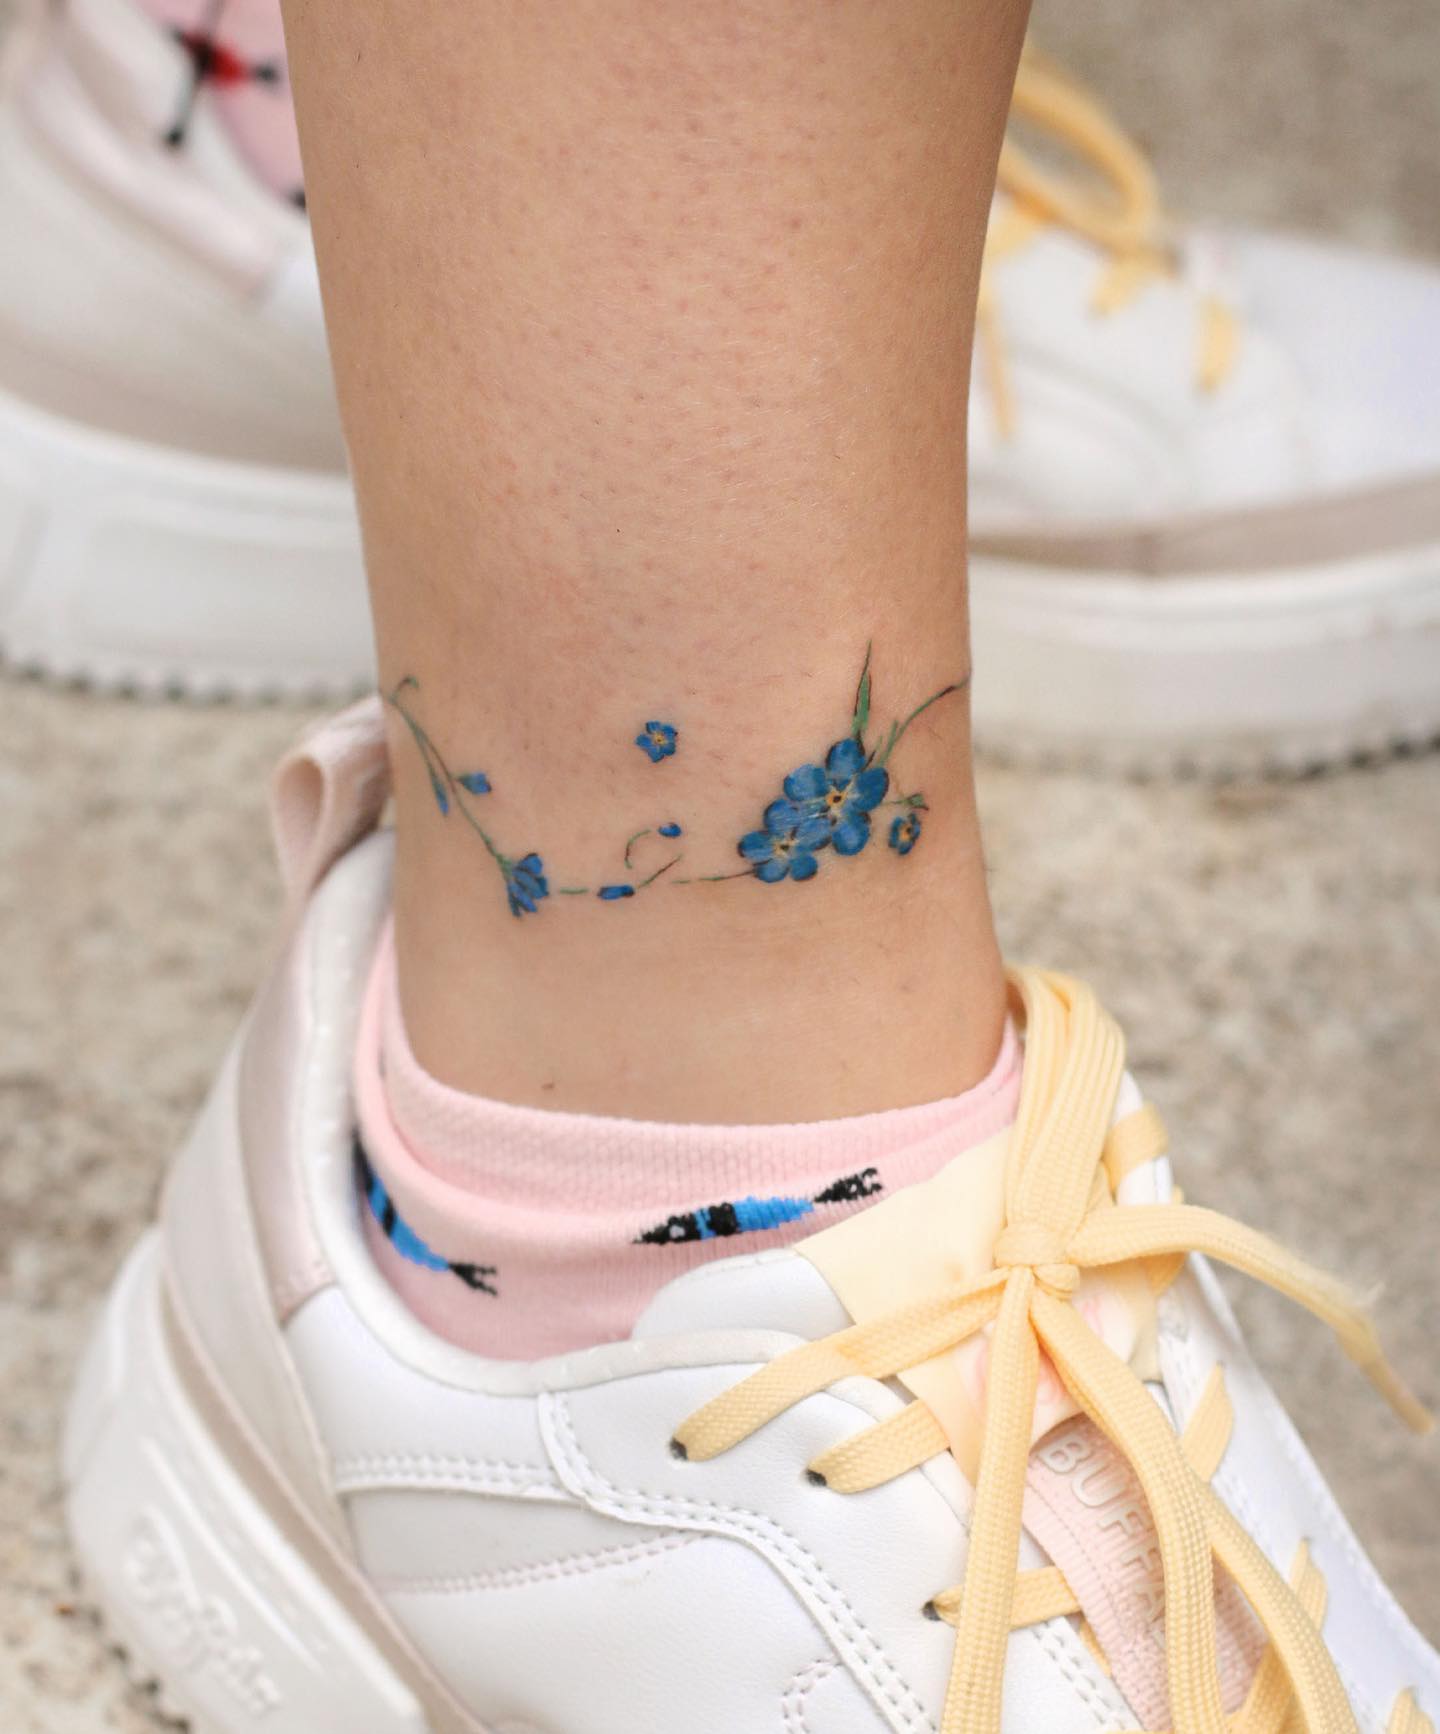 Cool ankle bracelet that you can show off proudly anywhere you go! This time, it is a symbol of inner beauty and nature that surrounds you. If you prefer artsy tattoos and blue is your favorite color, this will look amazing on you.